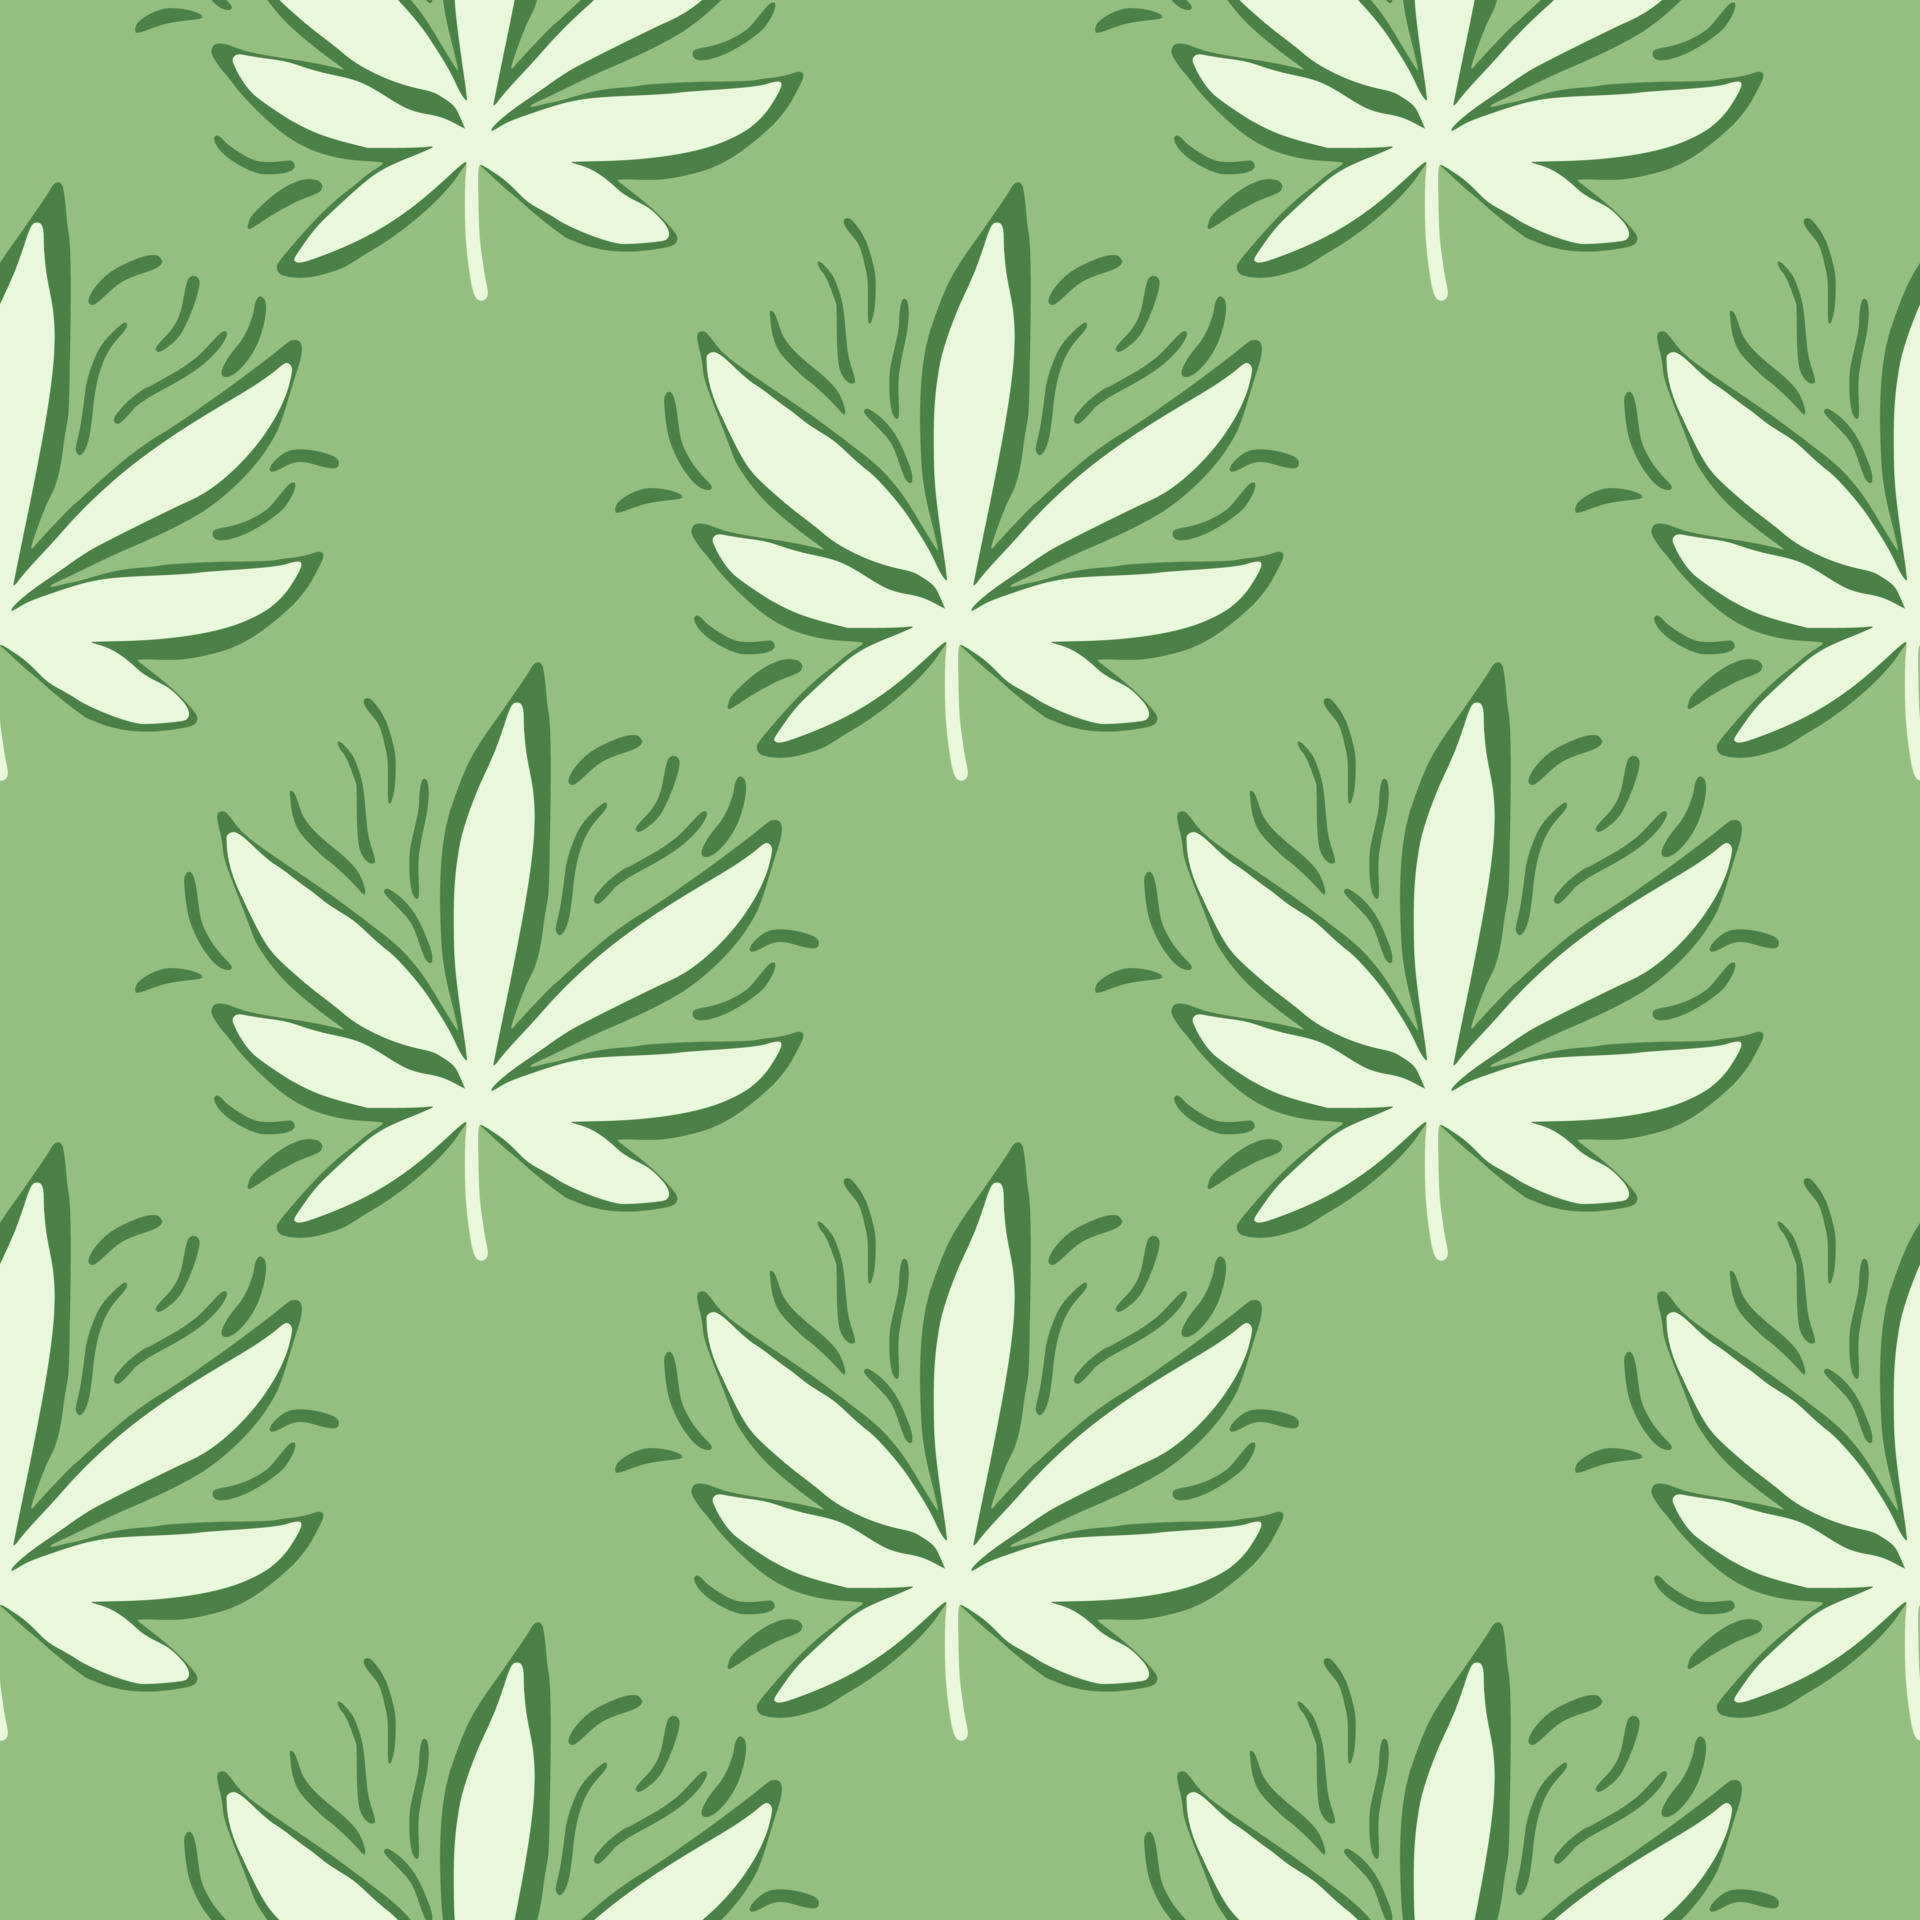 Take a Higher Trip with this Cartoon Weed Wallpaper